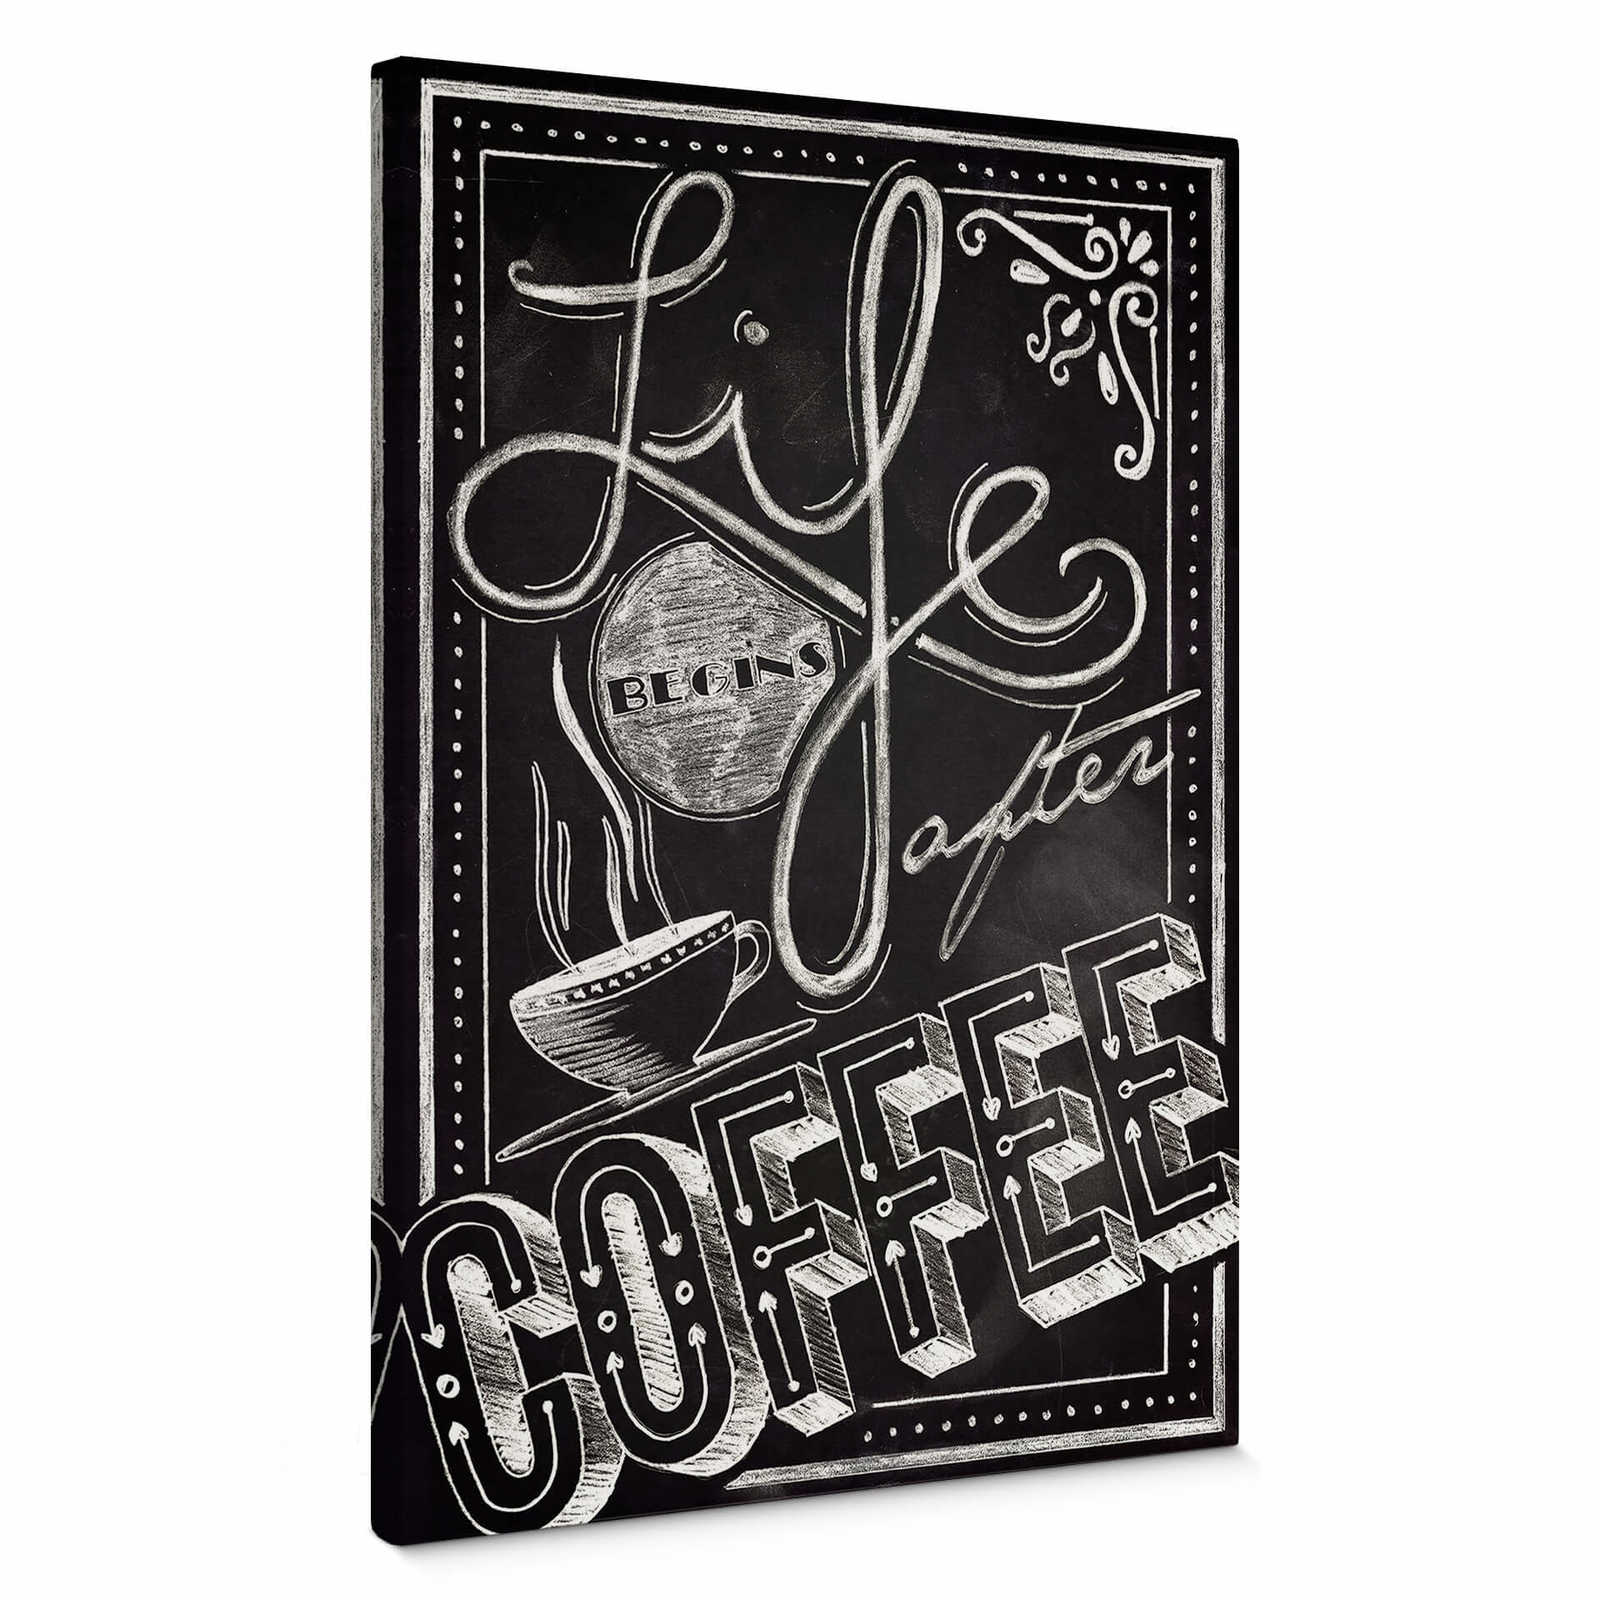         Canvas print coffeeshop sign, black and white
    